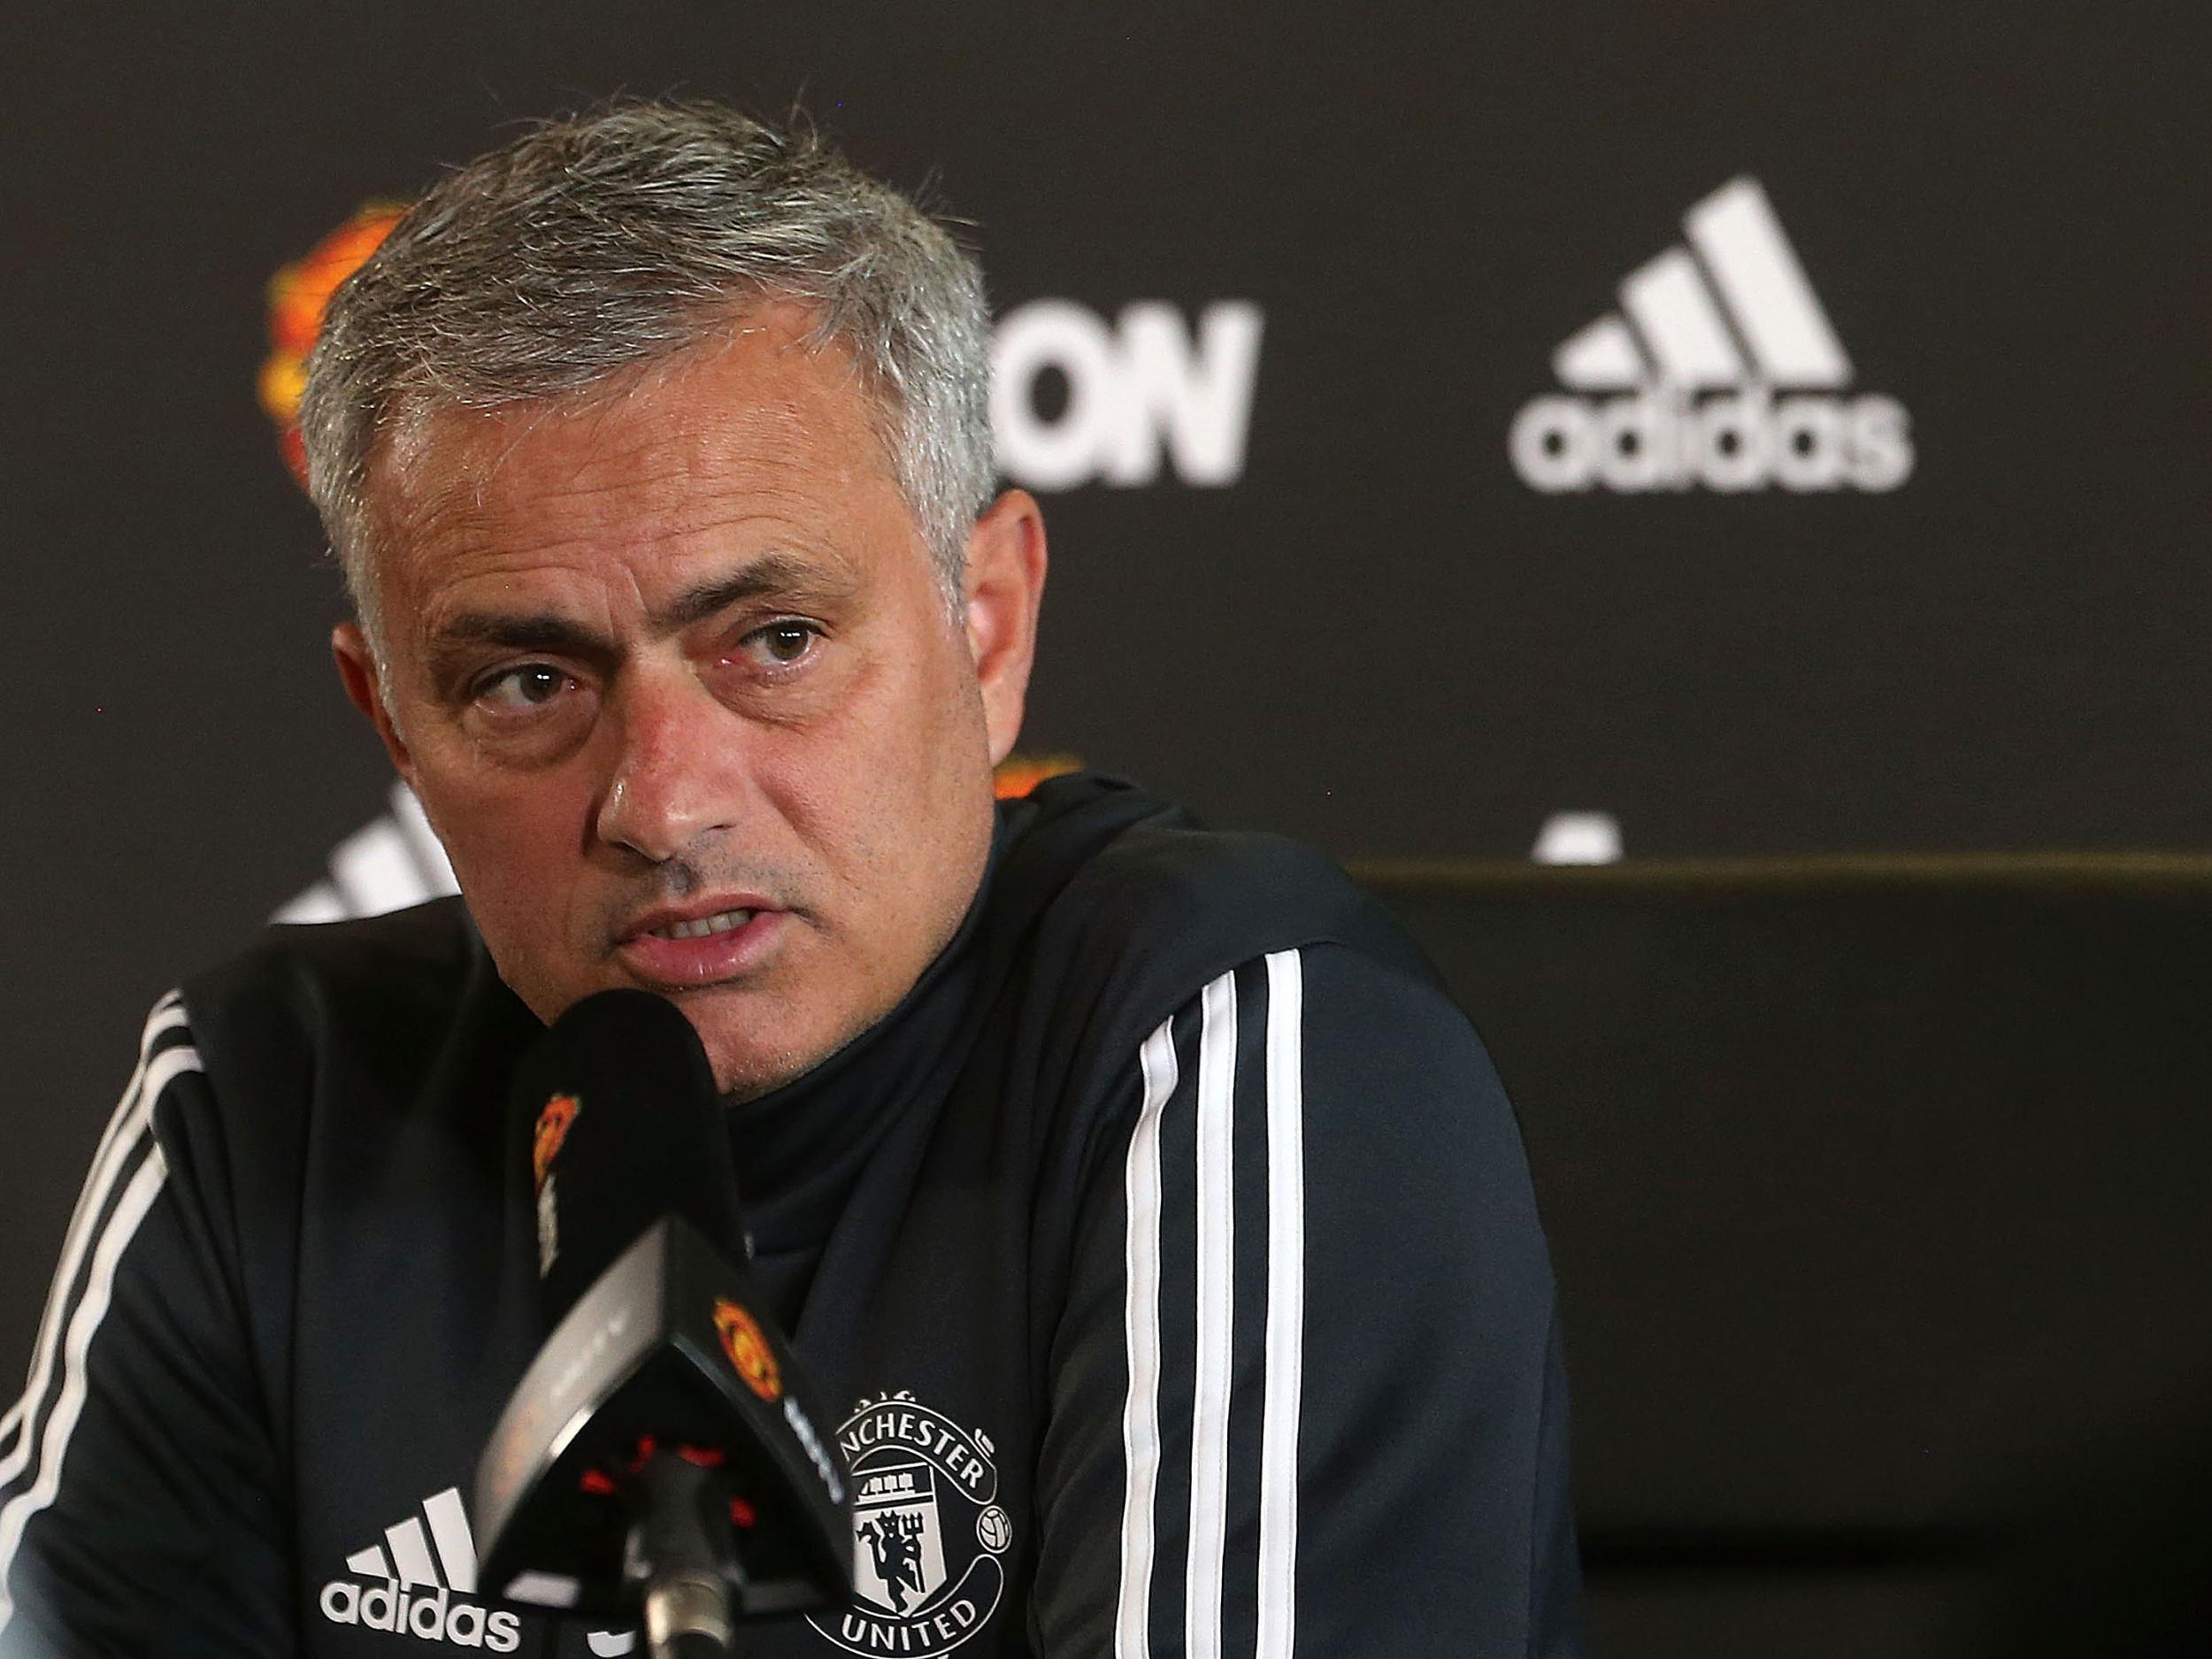 Jose Mourinho said he would have preferred to win 5-0 than 1-0 on Saturday